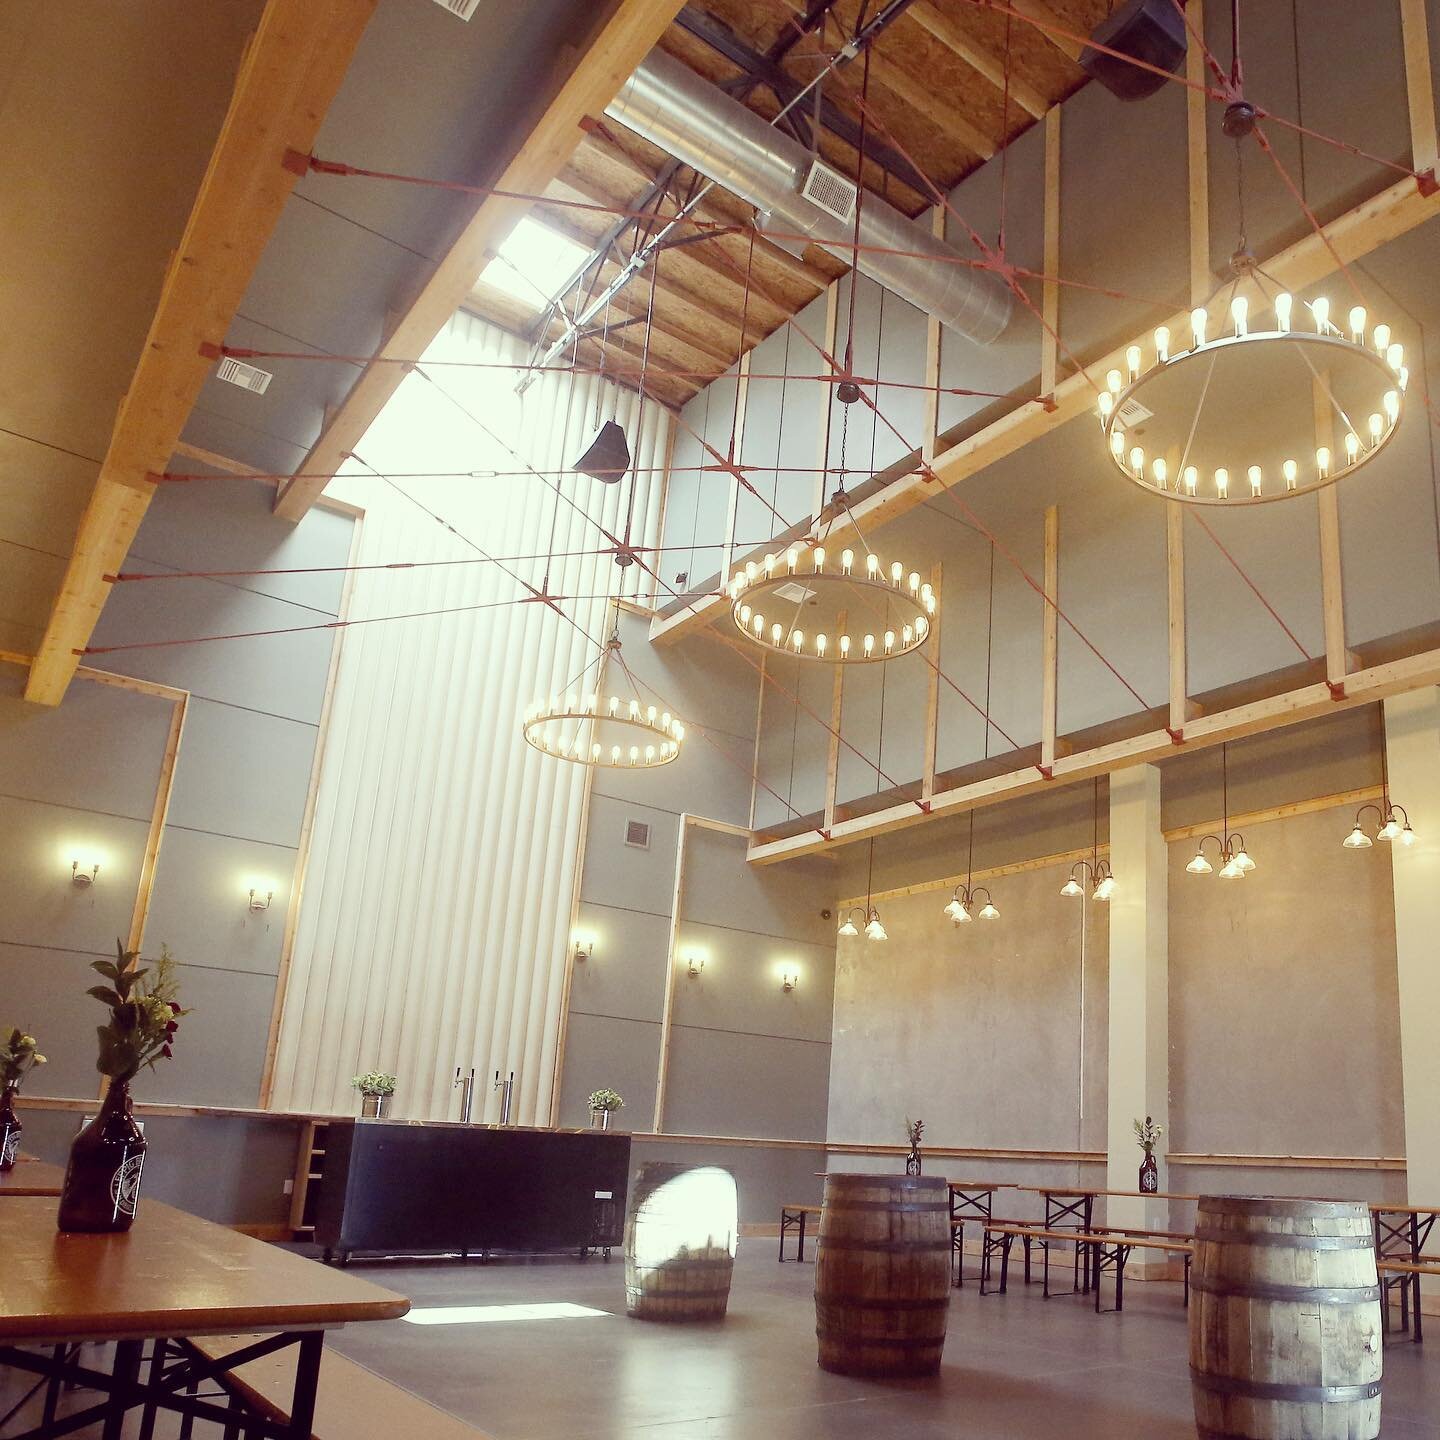 #COVID threw a lot of cold water on our plans to go out west to see the finished space for @eppigbrewing. As light forms at the end of the tunnel for traveling, pictures like this one of the mighty Beer Hall are enough to get our plans in motion agai